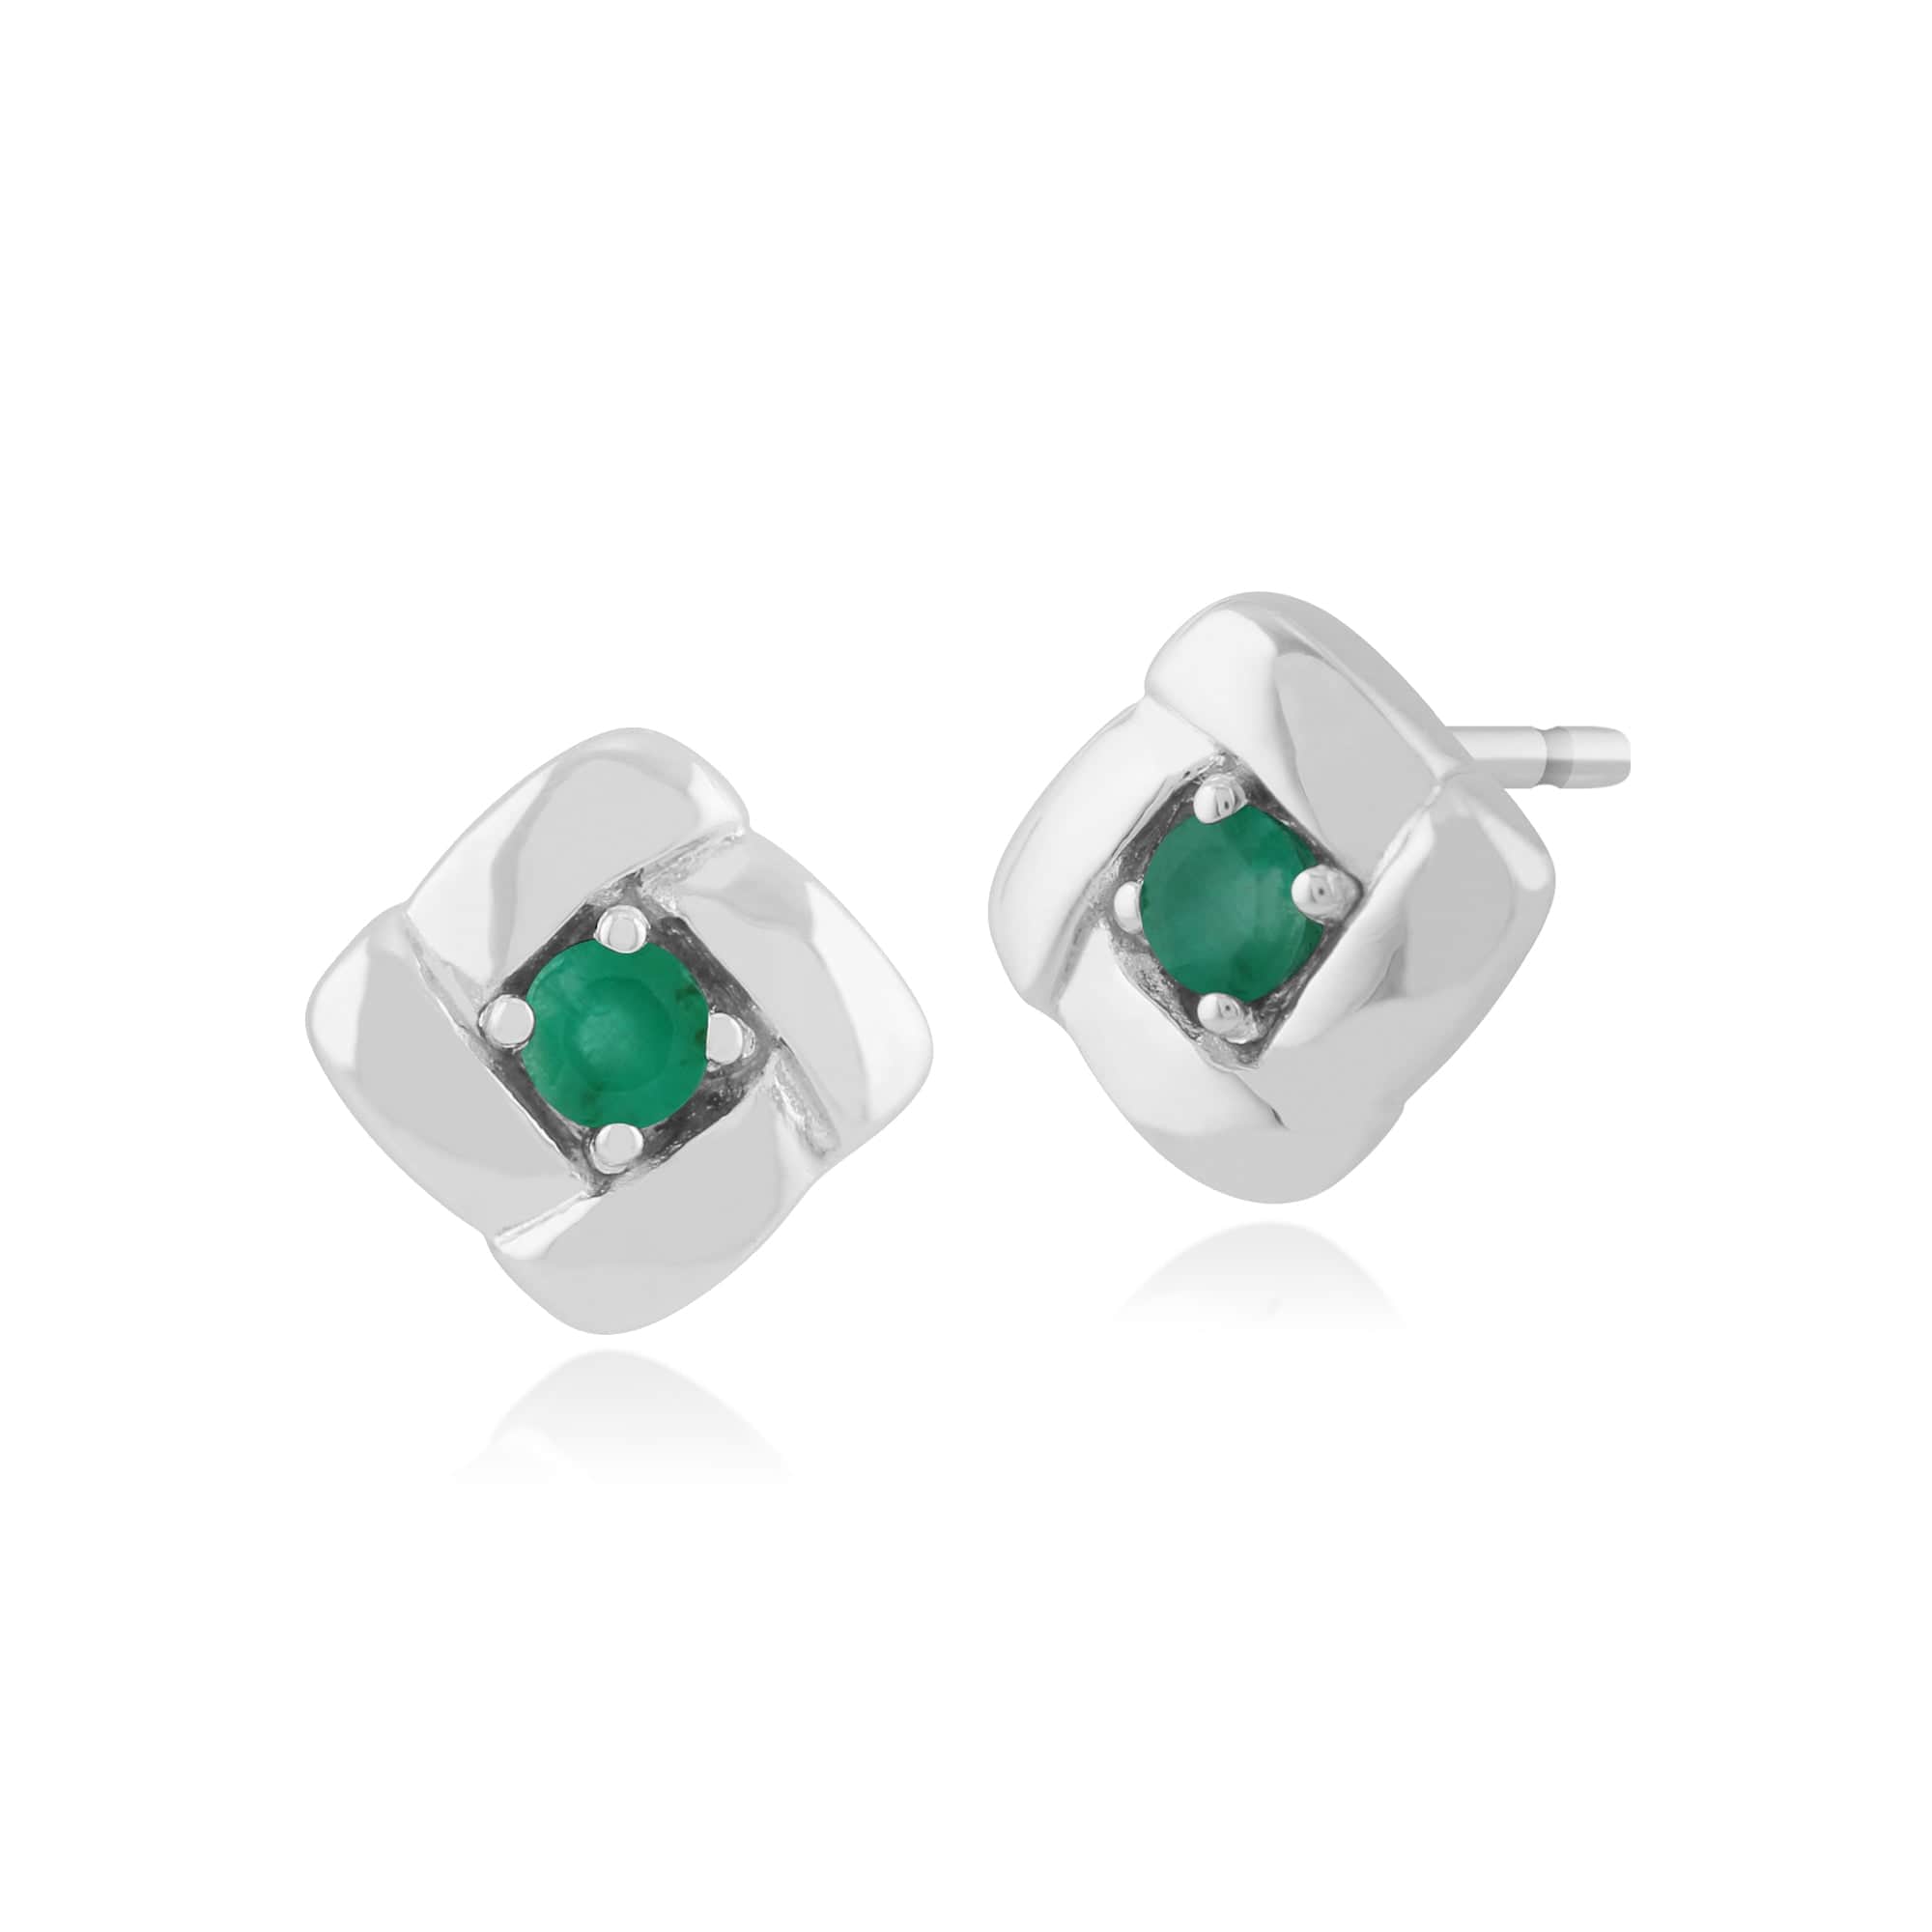 Classic Round Emerald Square Crossover Stud Earrings in 925 Sterling Silver - Gemondo